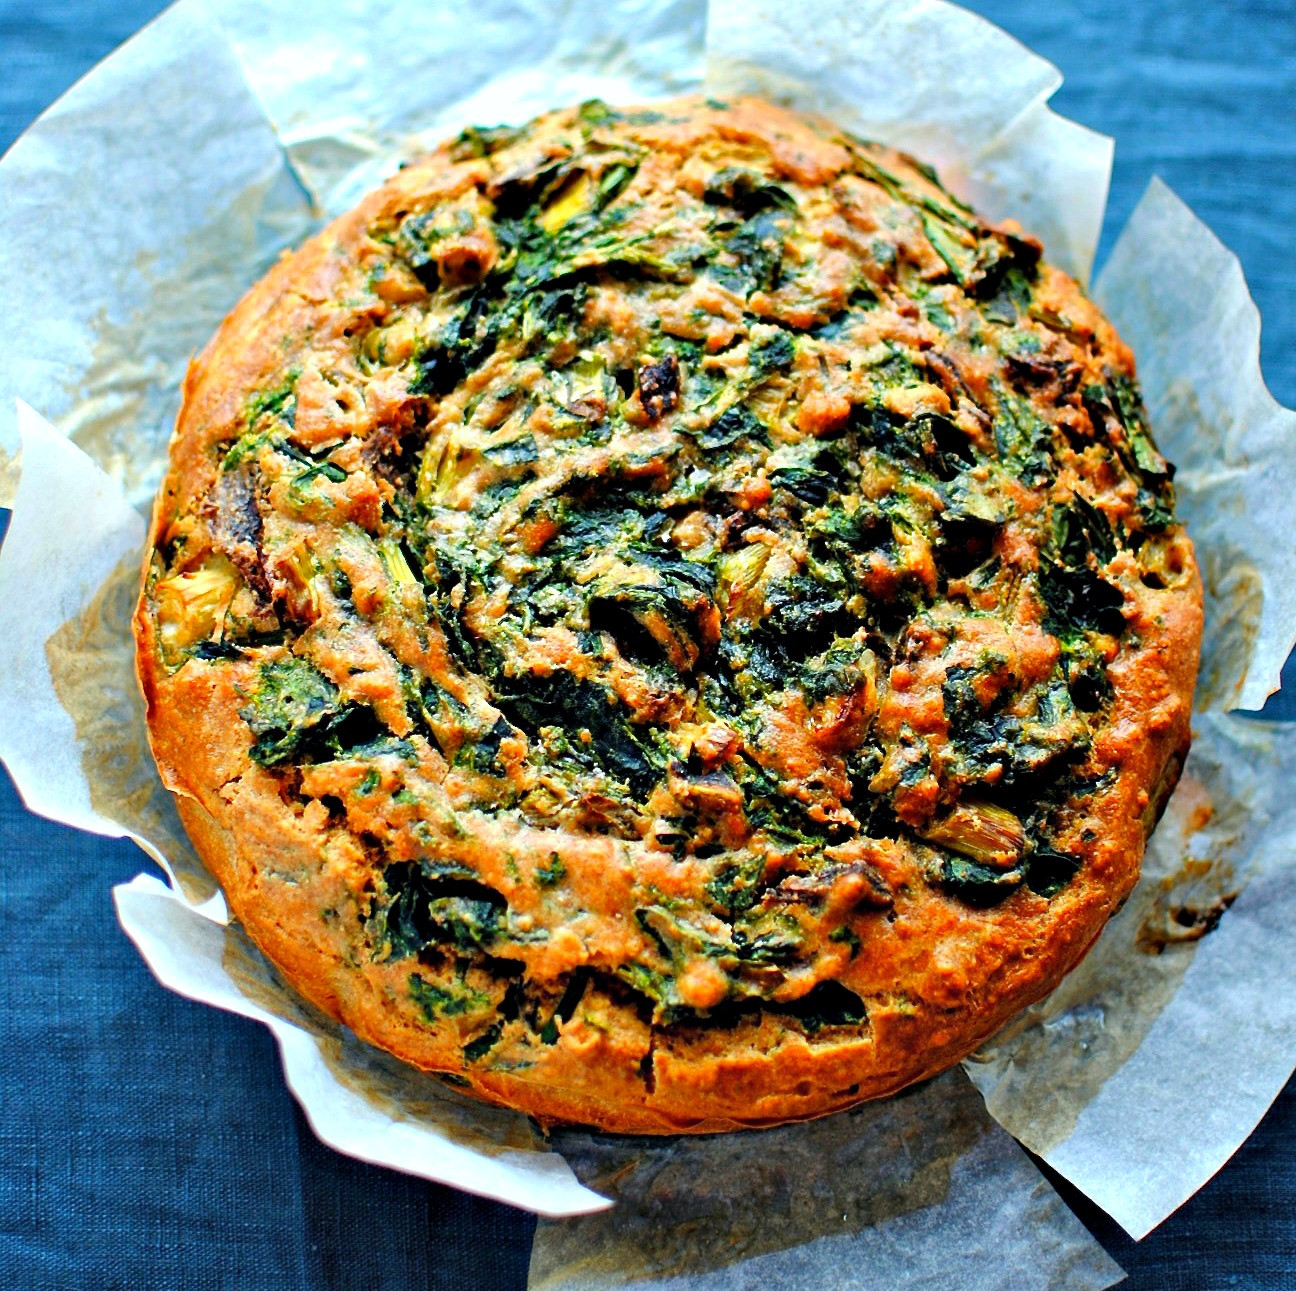 Vegetables Cake Recipes
 A Savoury Ve able Cake for Easter